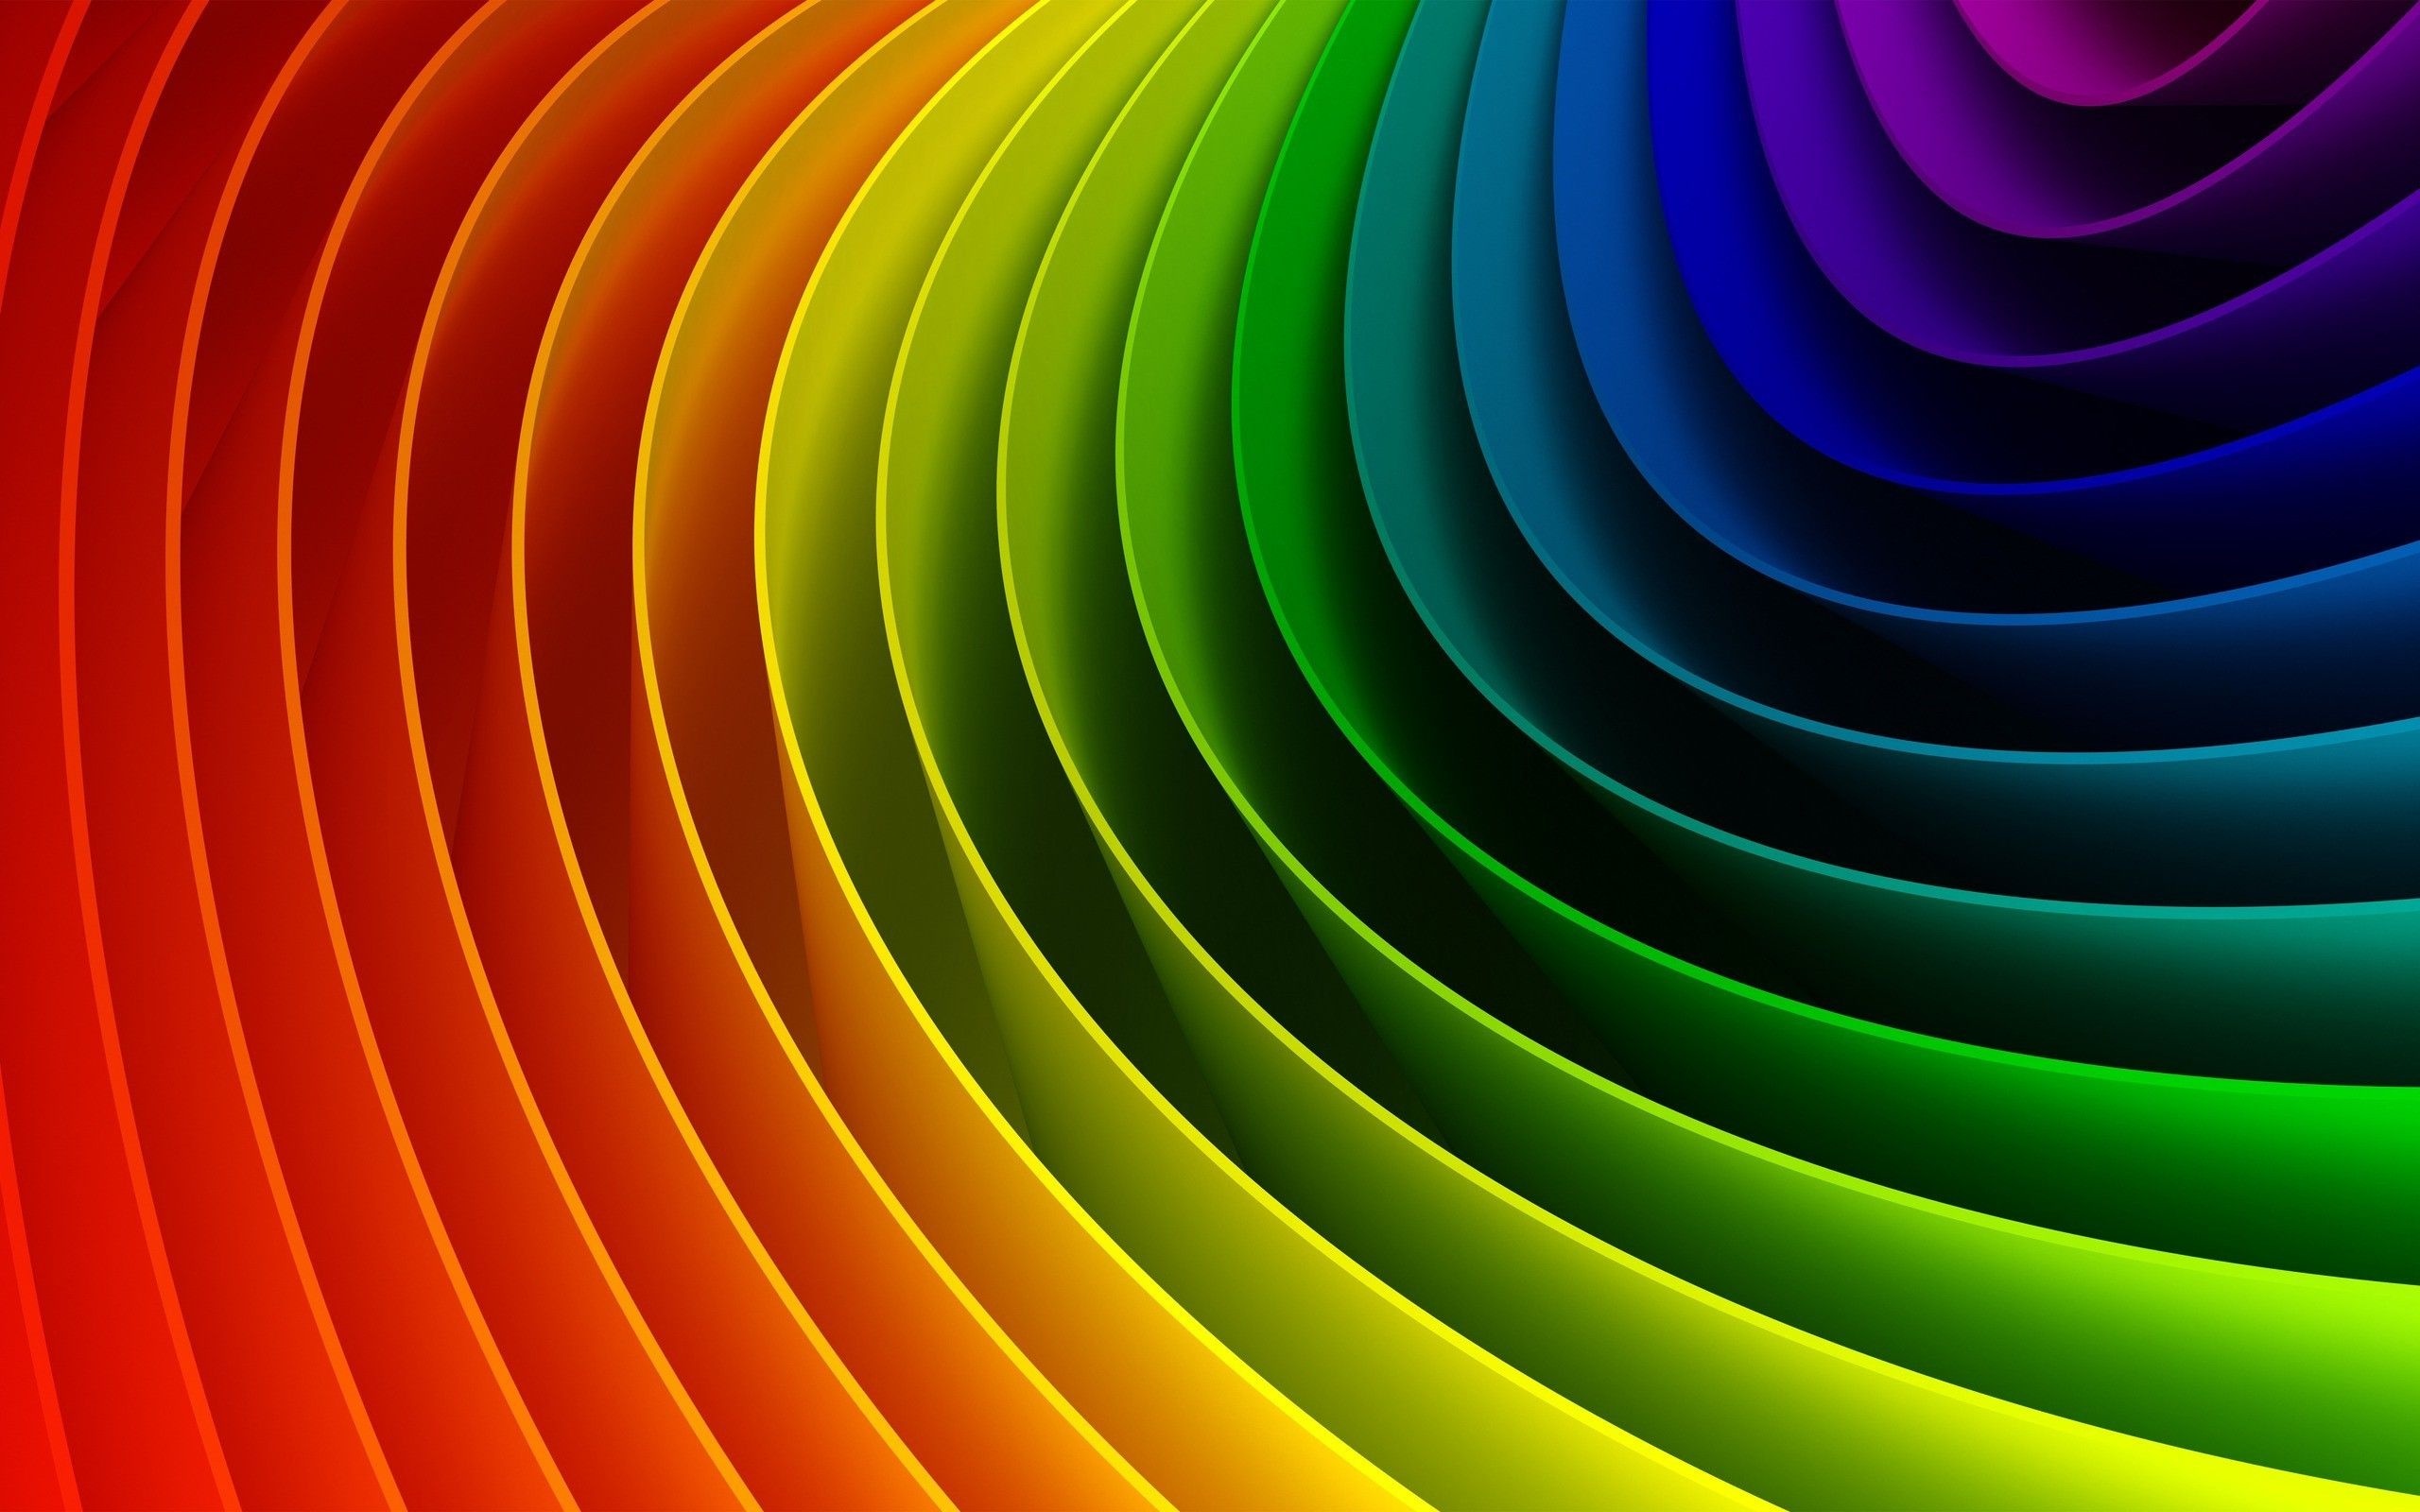 Rainbow desktop wallpapers, Vivid and vibrant, Multicolored spectrum, Dynamic and lively, 2560x1600 HD Desktop